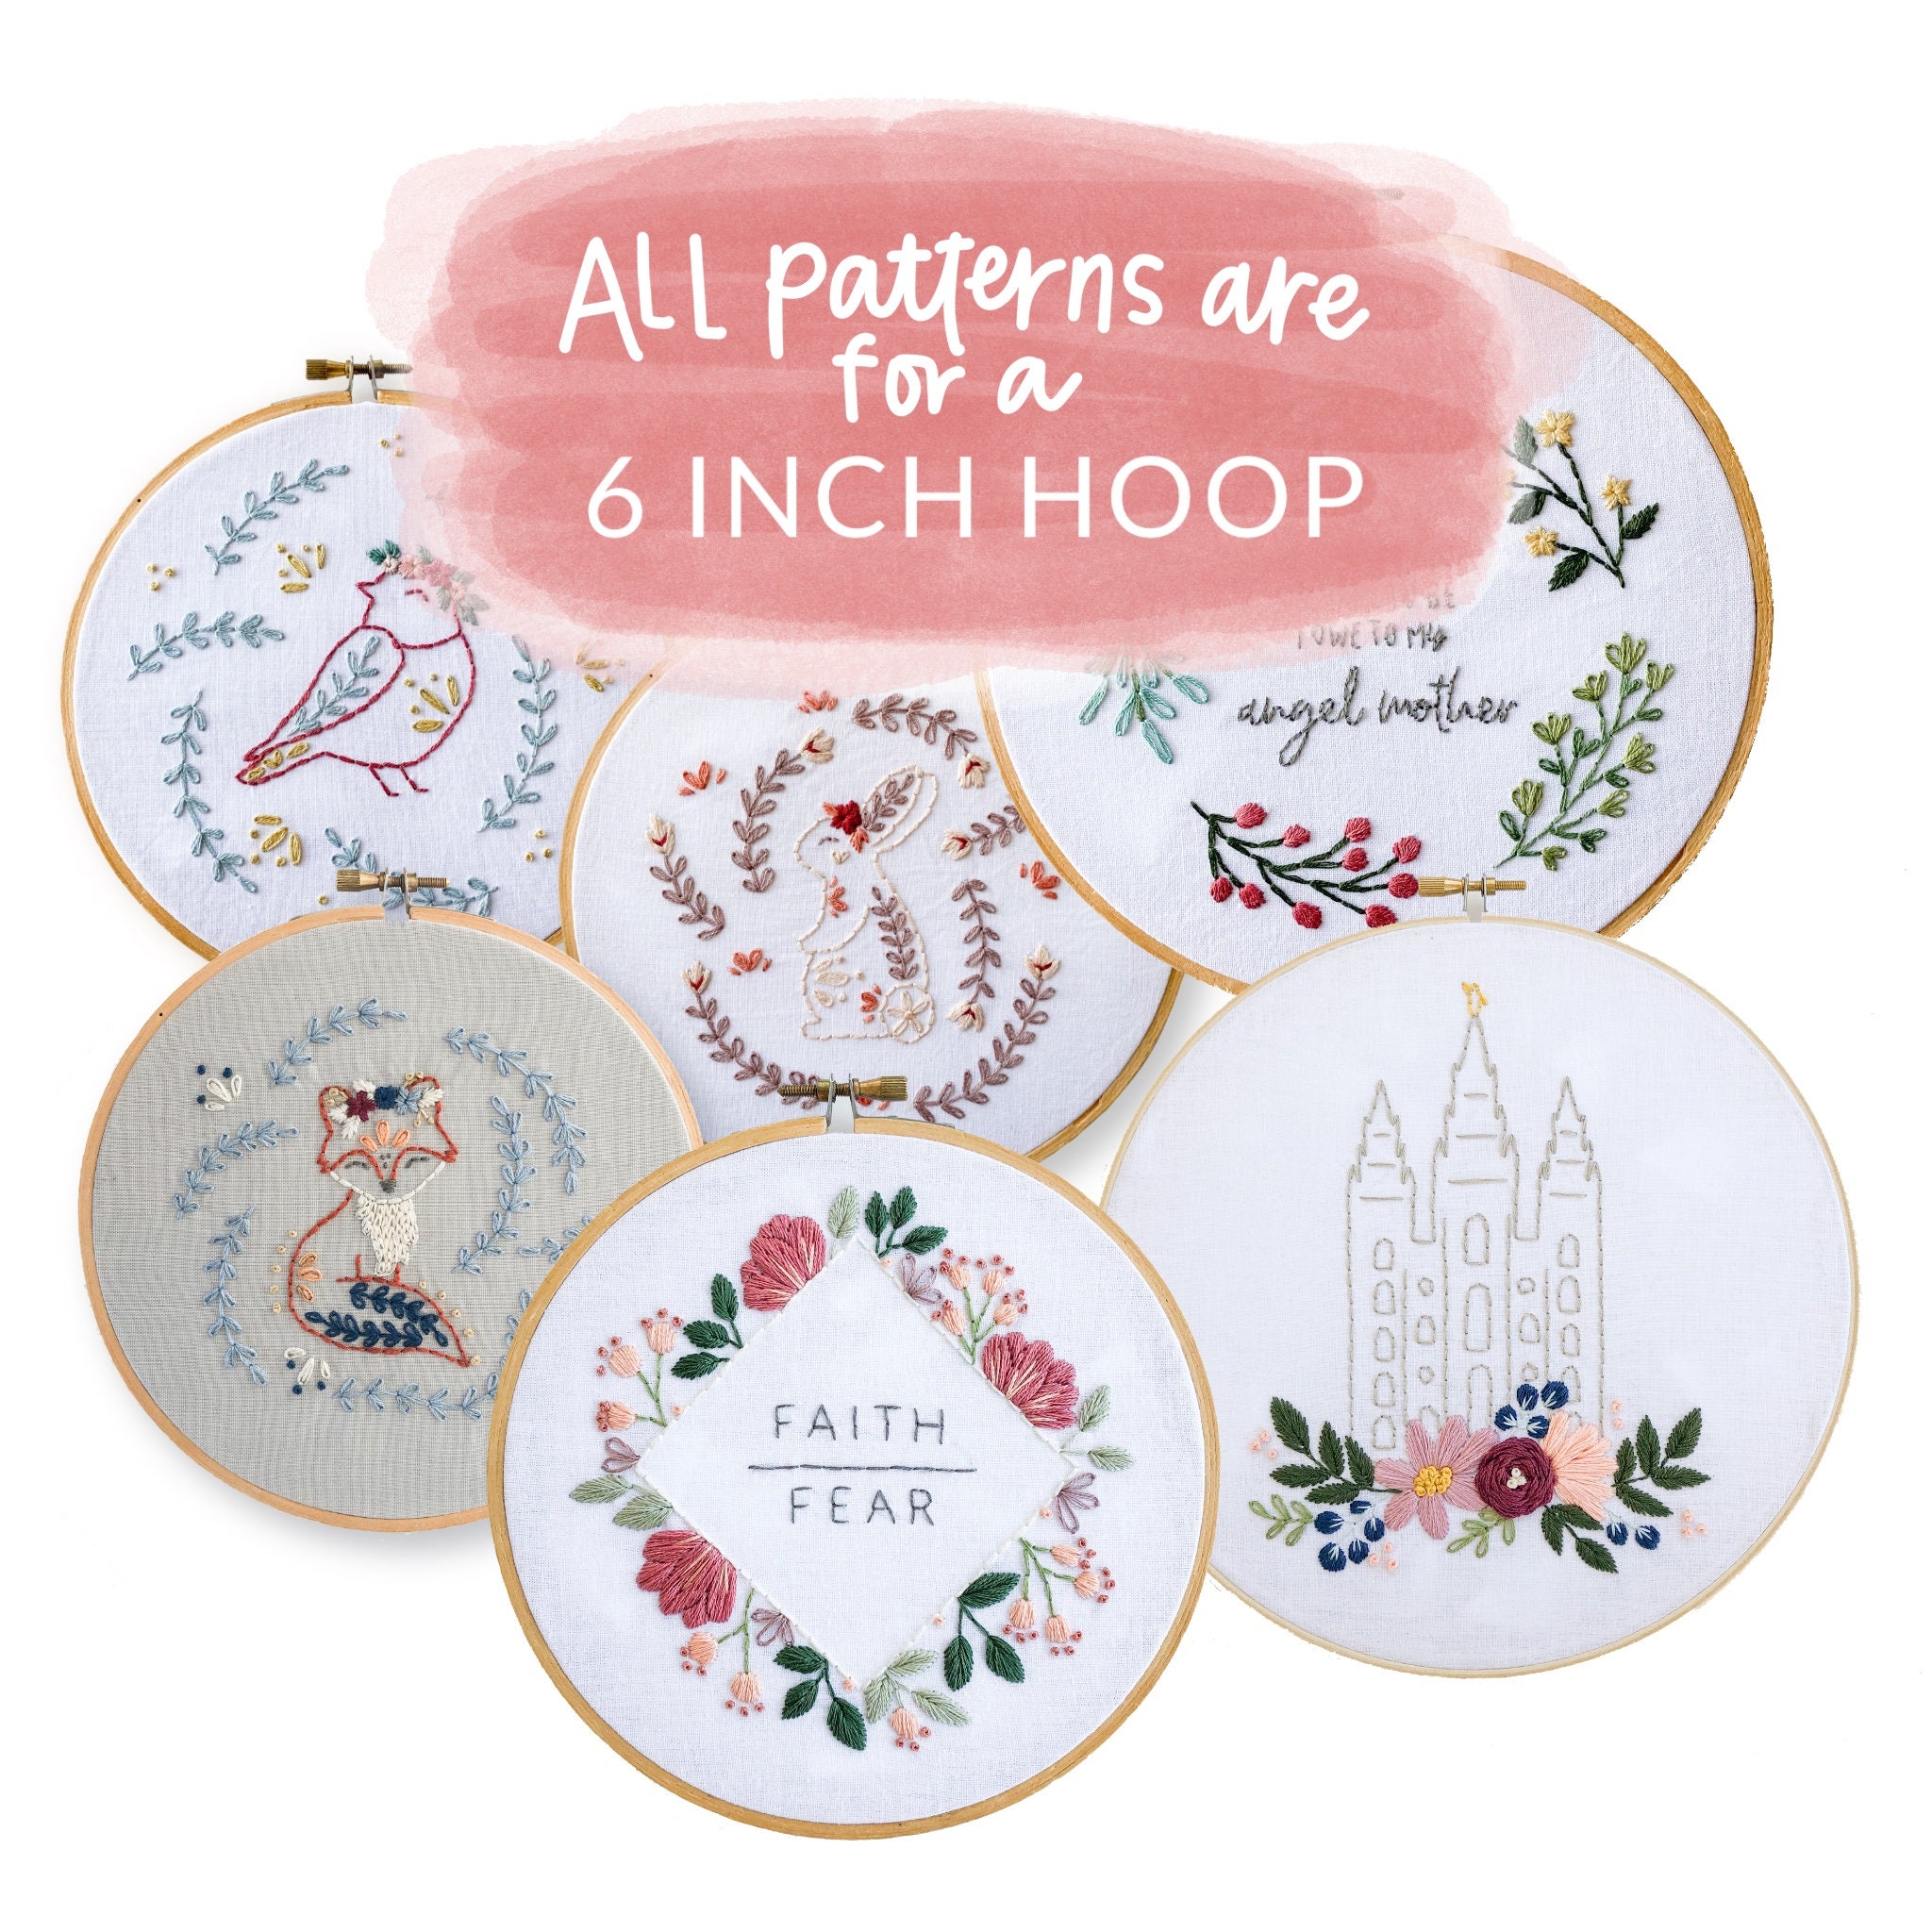 Full Kit, Believe in Your Shelf Hand Embroidery, Book Embroidery Kit  Embroidery Pattern, Inspirational Embroidery Pattern, Cross Stitch Kit 